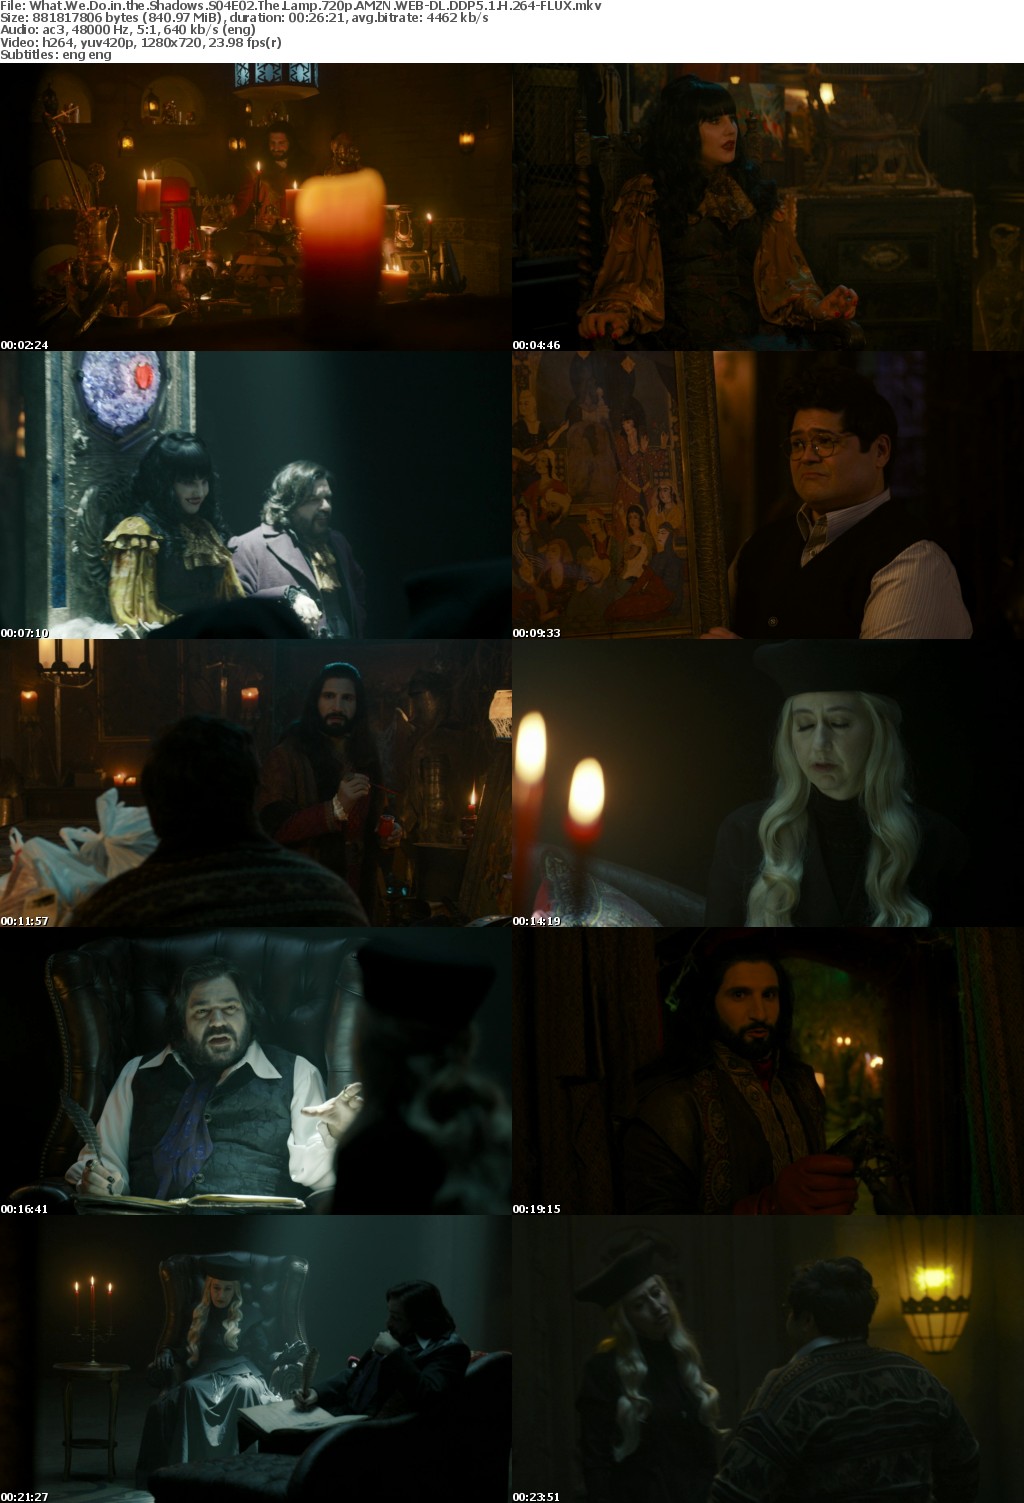 What We Do in the Shadows S04E02 The Lamp 720p AMZN WEBRip DDP5 1 x264-FLUX